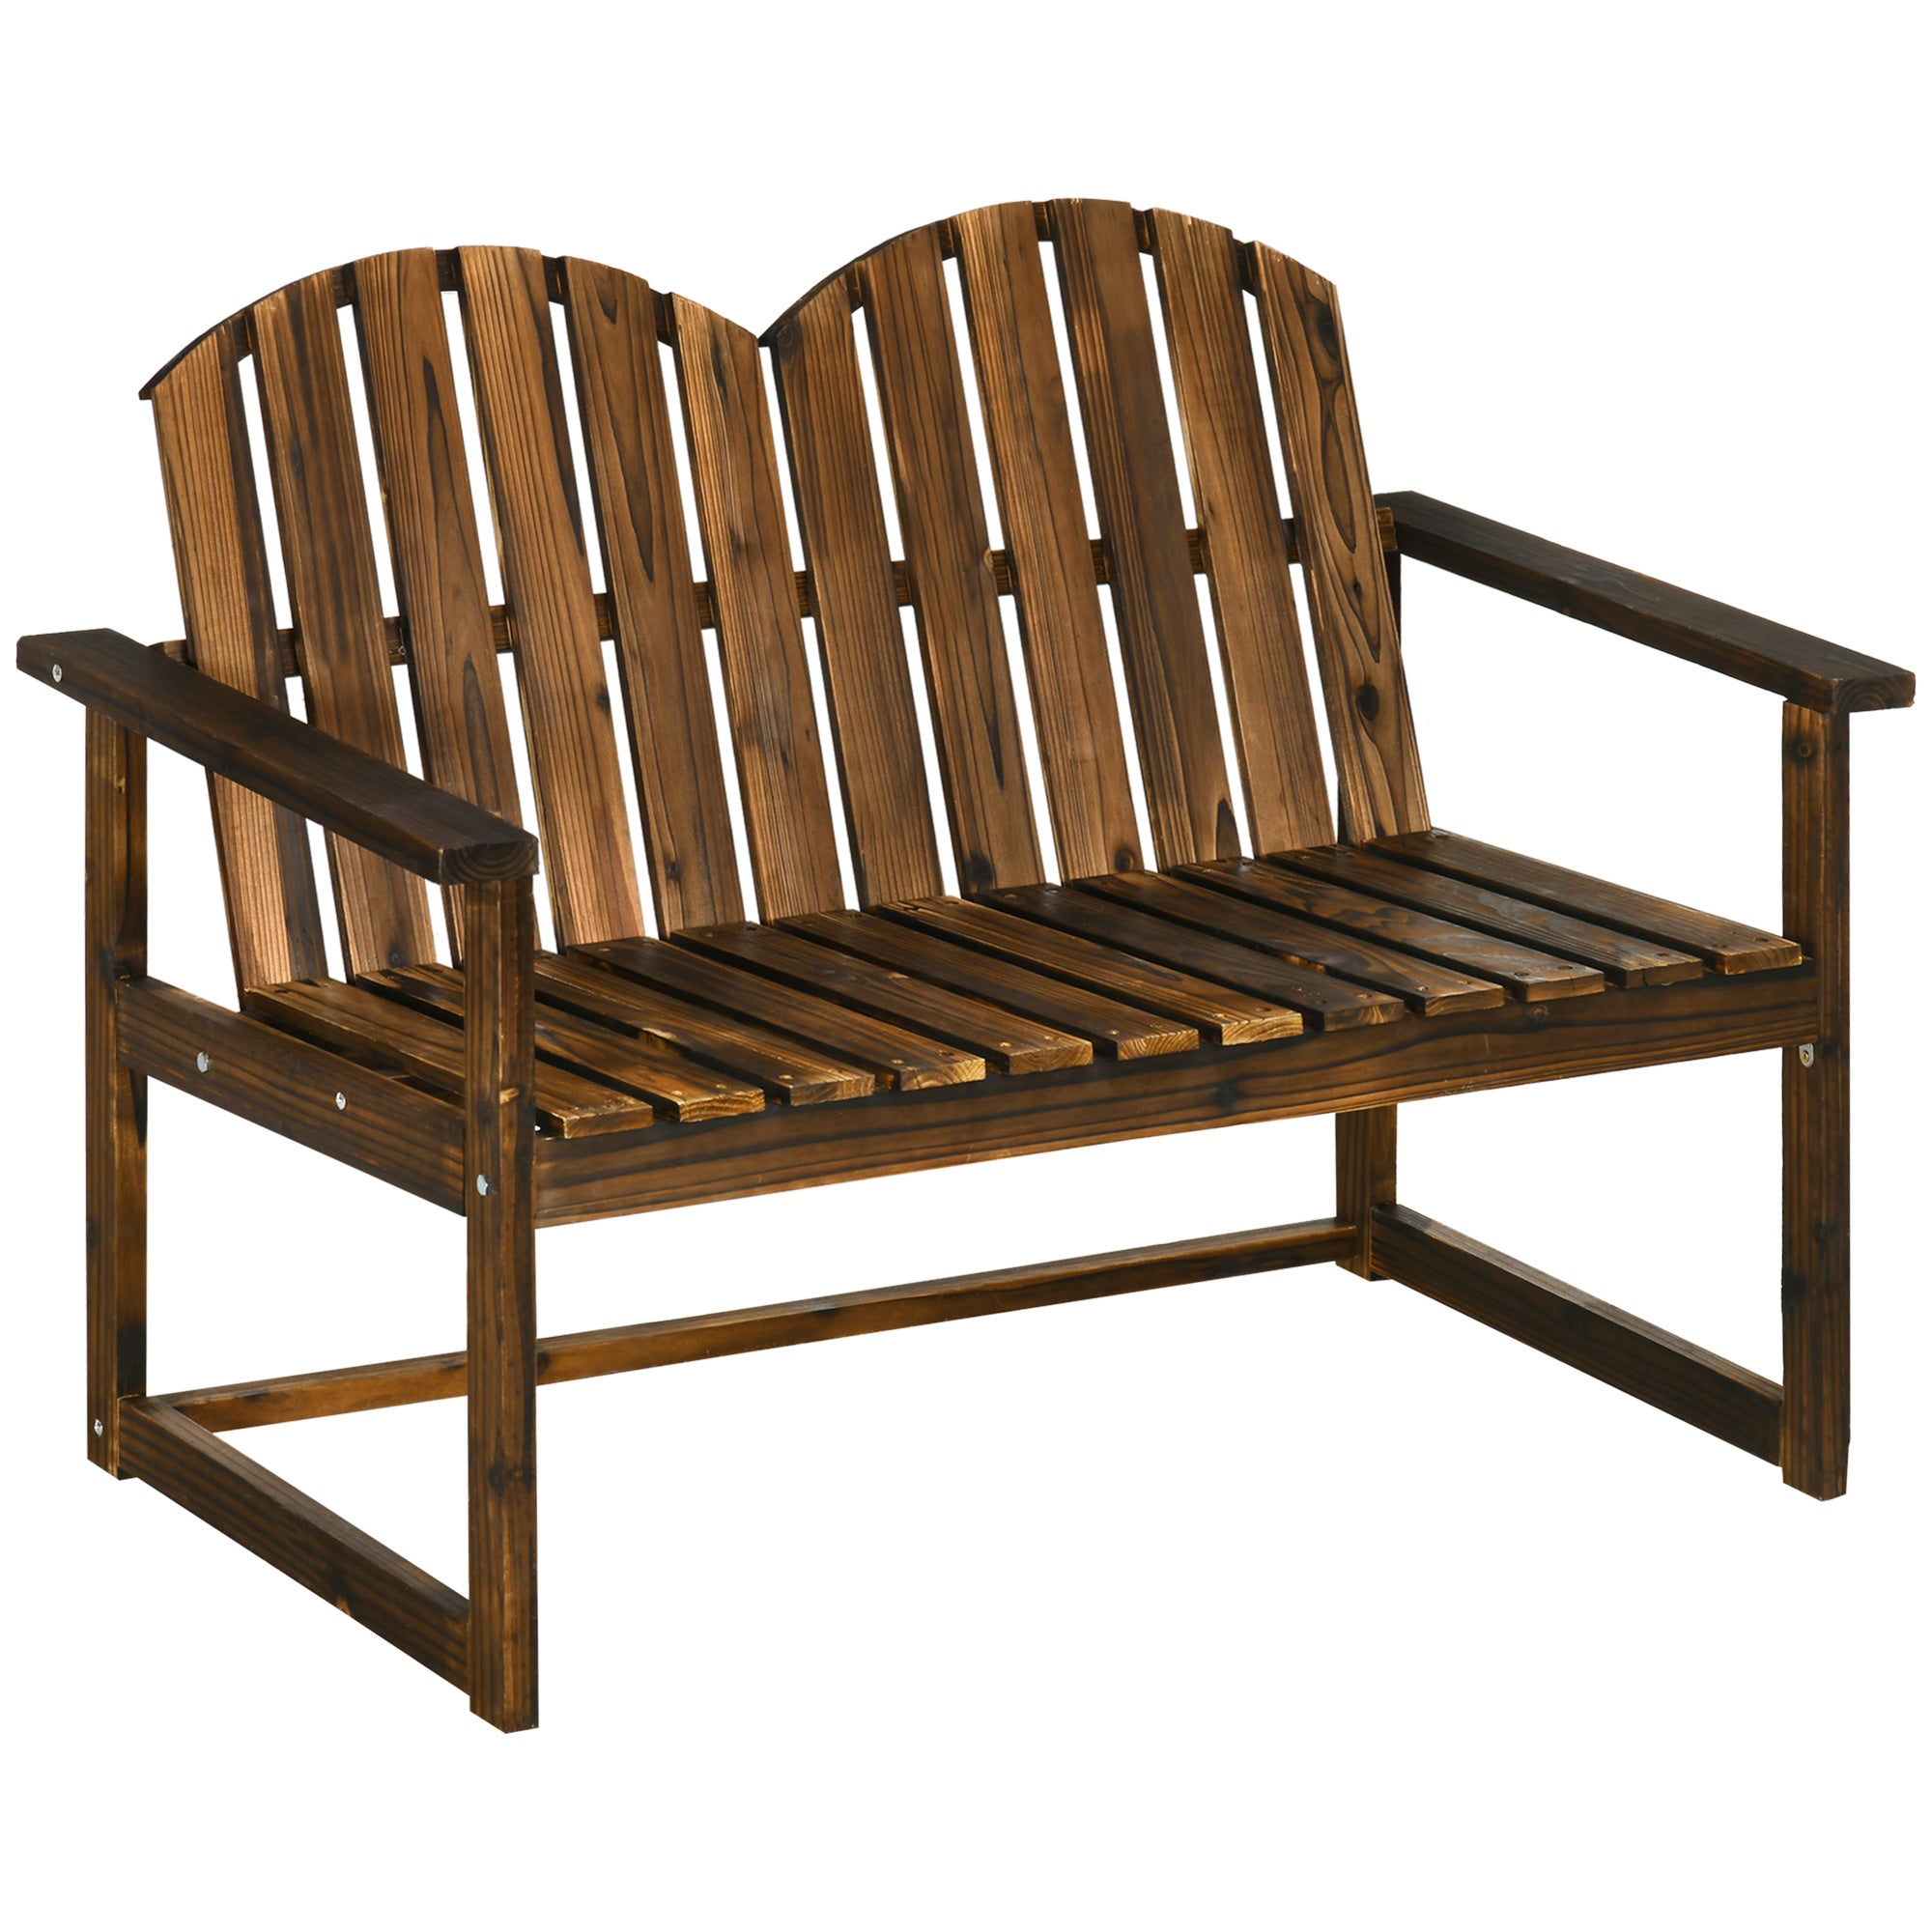 Outsunny Wooden Bench for Two People - Patio Loveseat Chair w/ Slatted Backrest  | TJ Hughes